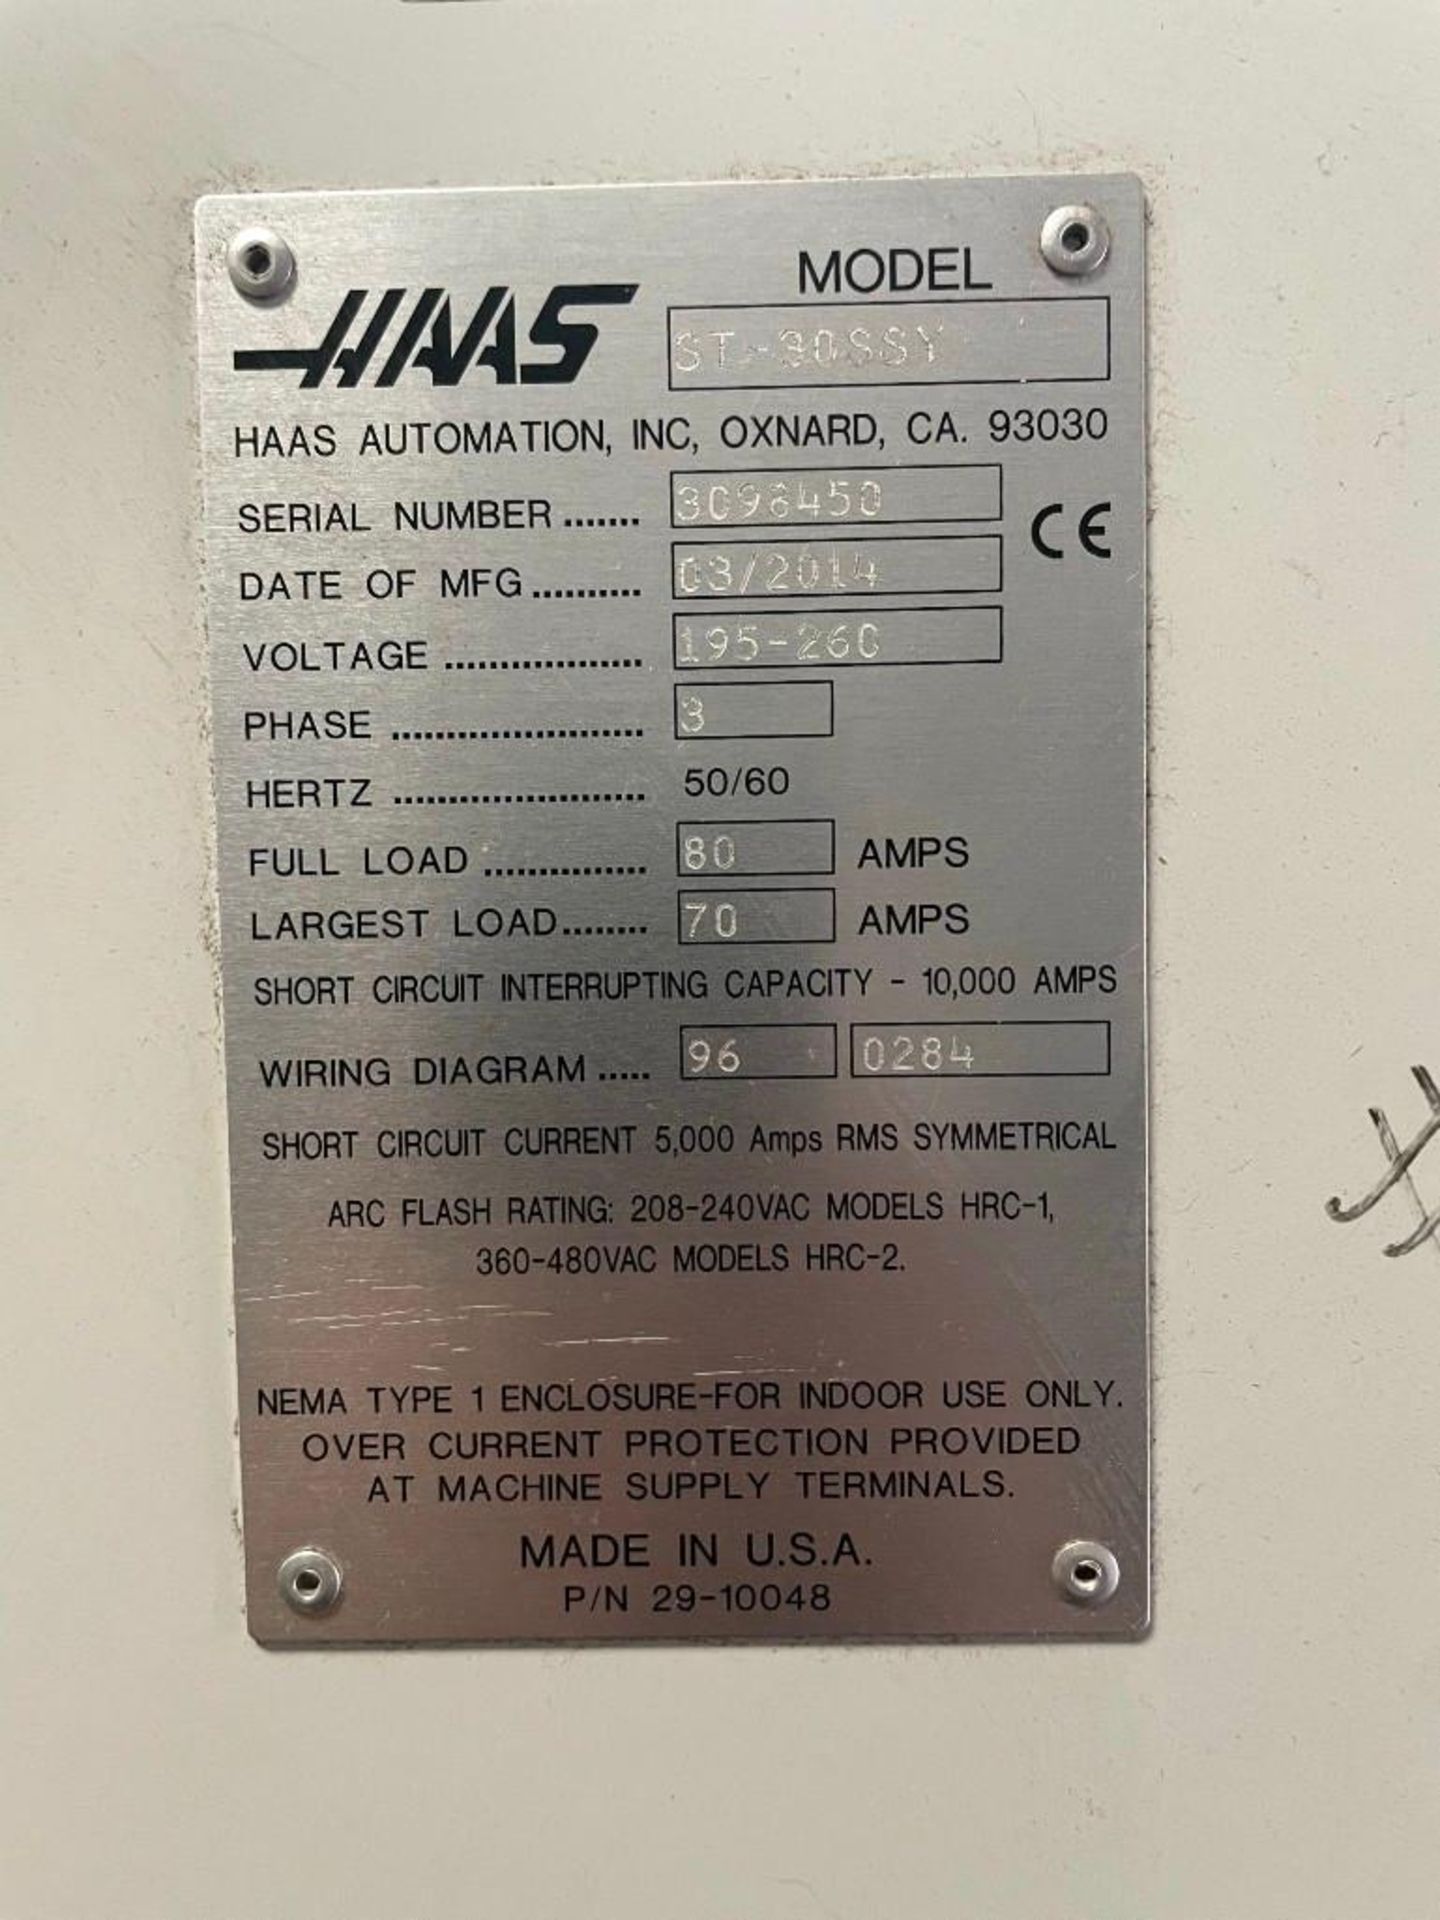 Haas ST30SSY, Y-Axis, Live, No Sub, Parts Catcher, Chip Conveyor, s/n 3098450, New 2014 - Image 6 of 6